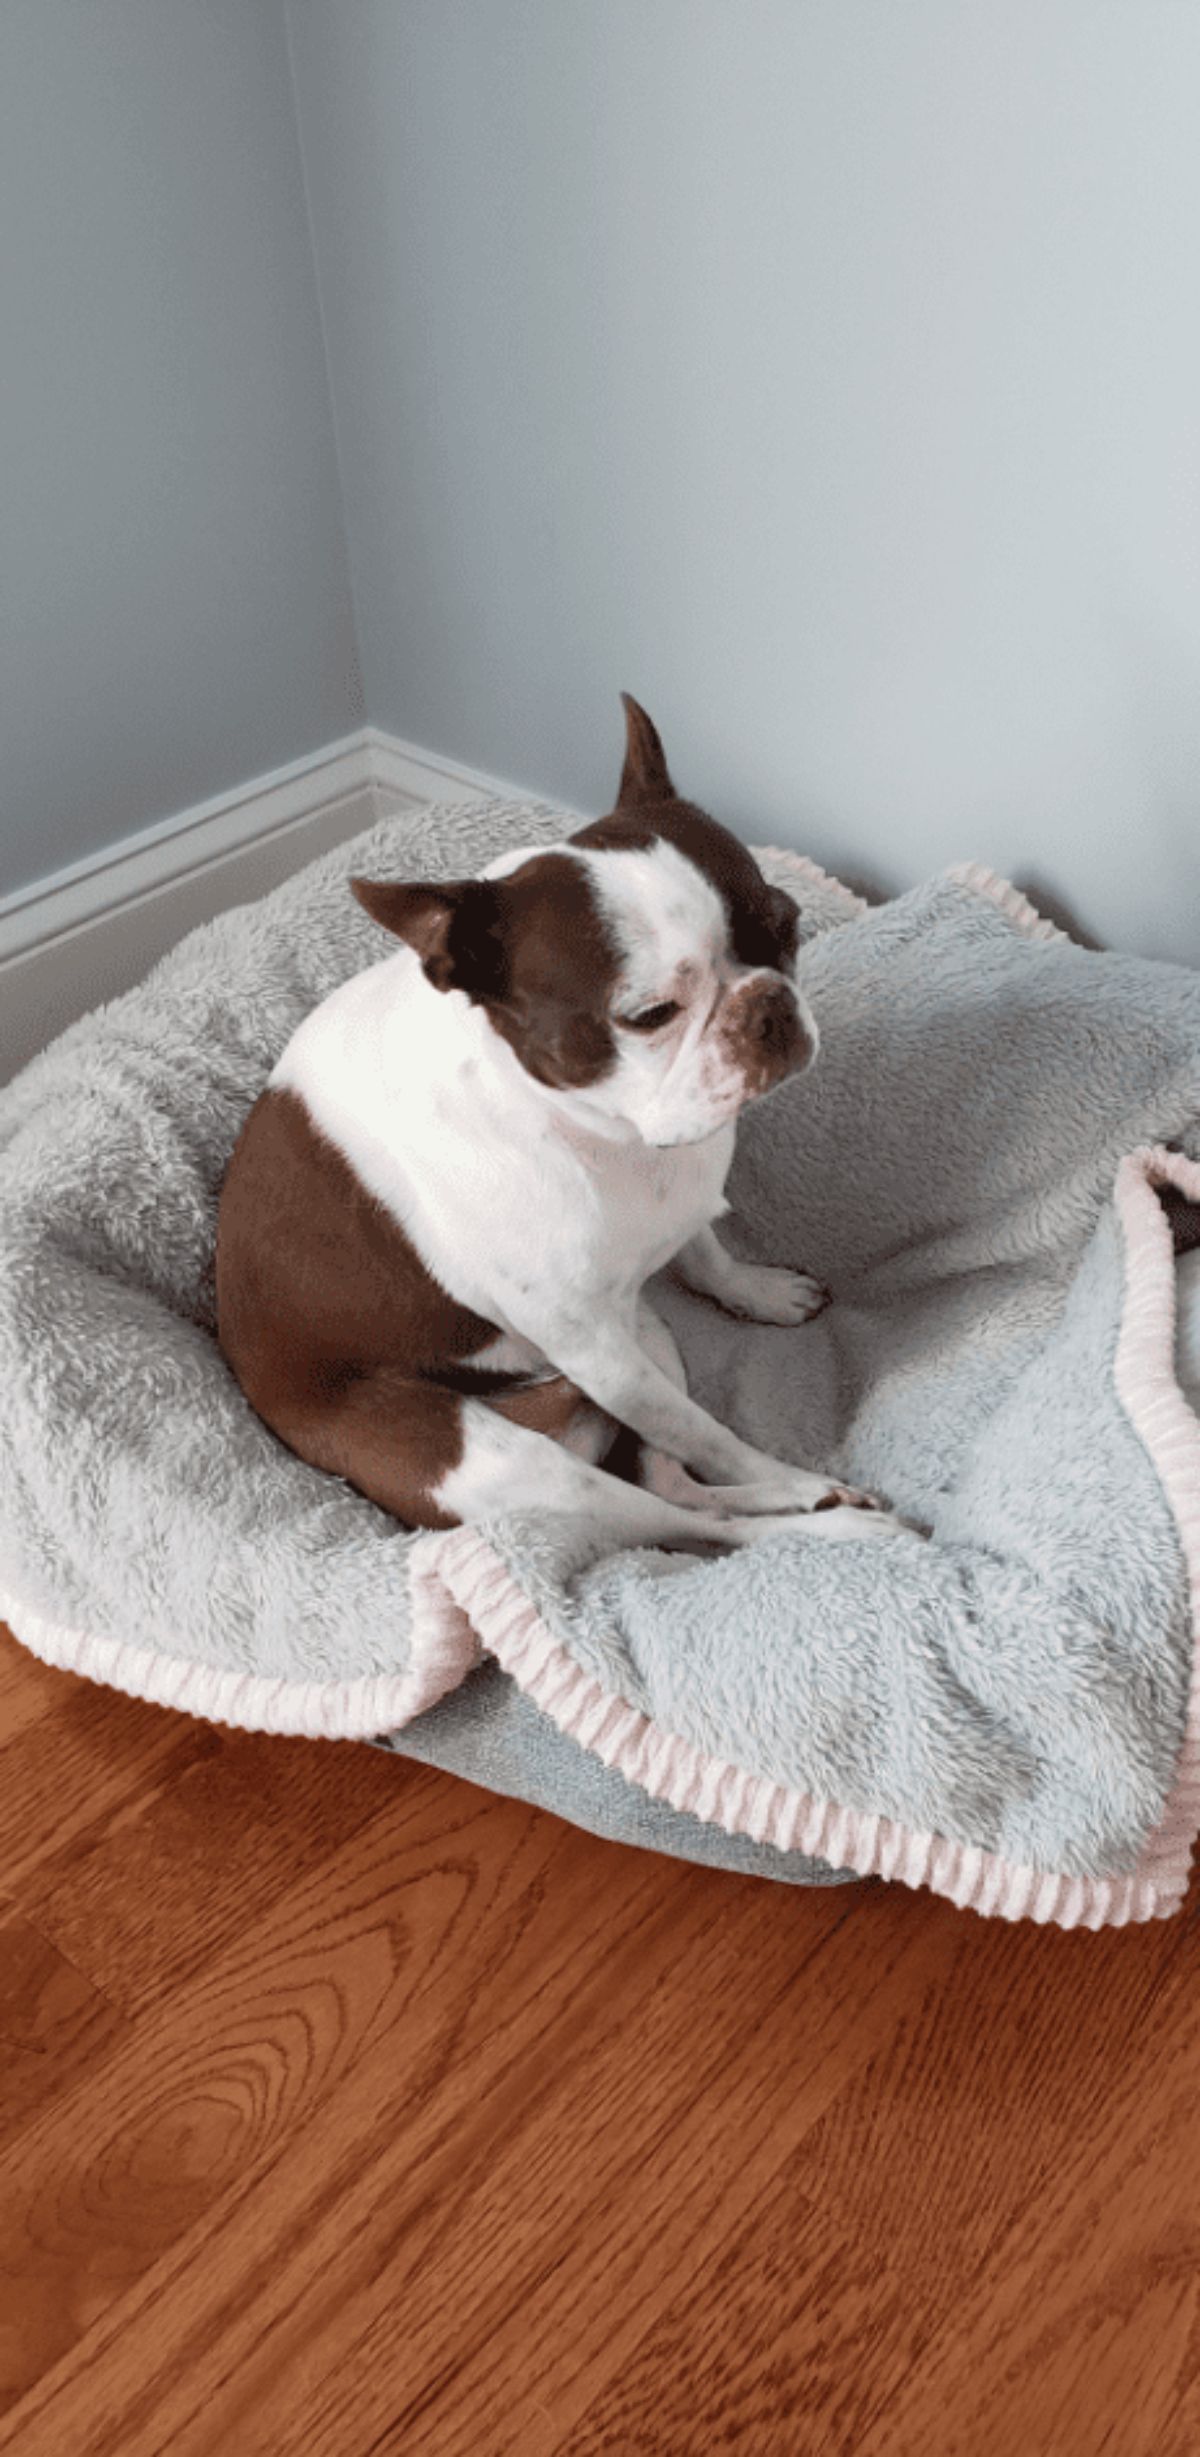 brown and white dog sitting on its haunches in a grey dog bed